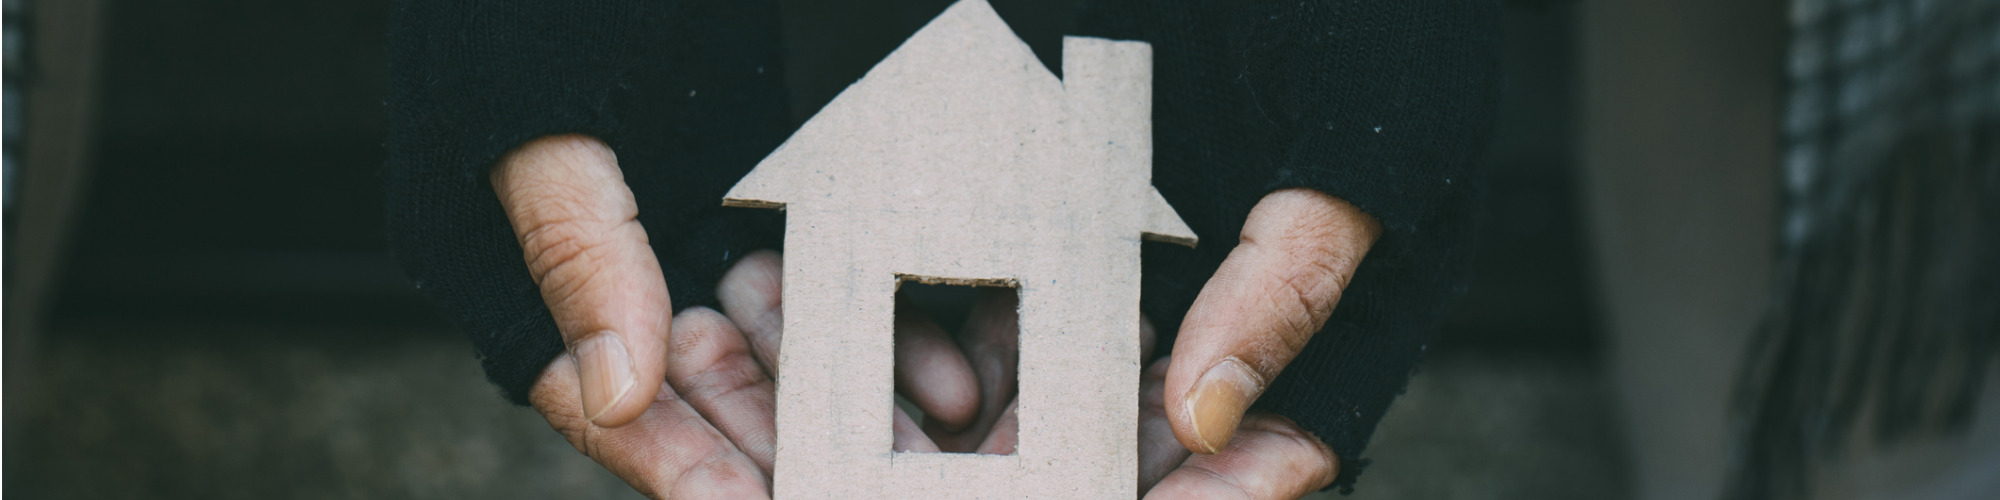 Making & Challenging Homeless Decisions - A Guide for Housing Professionals